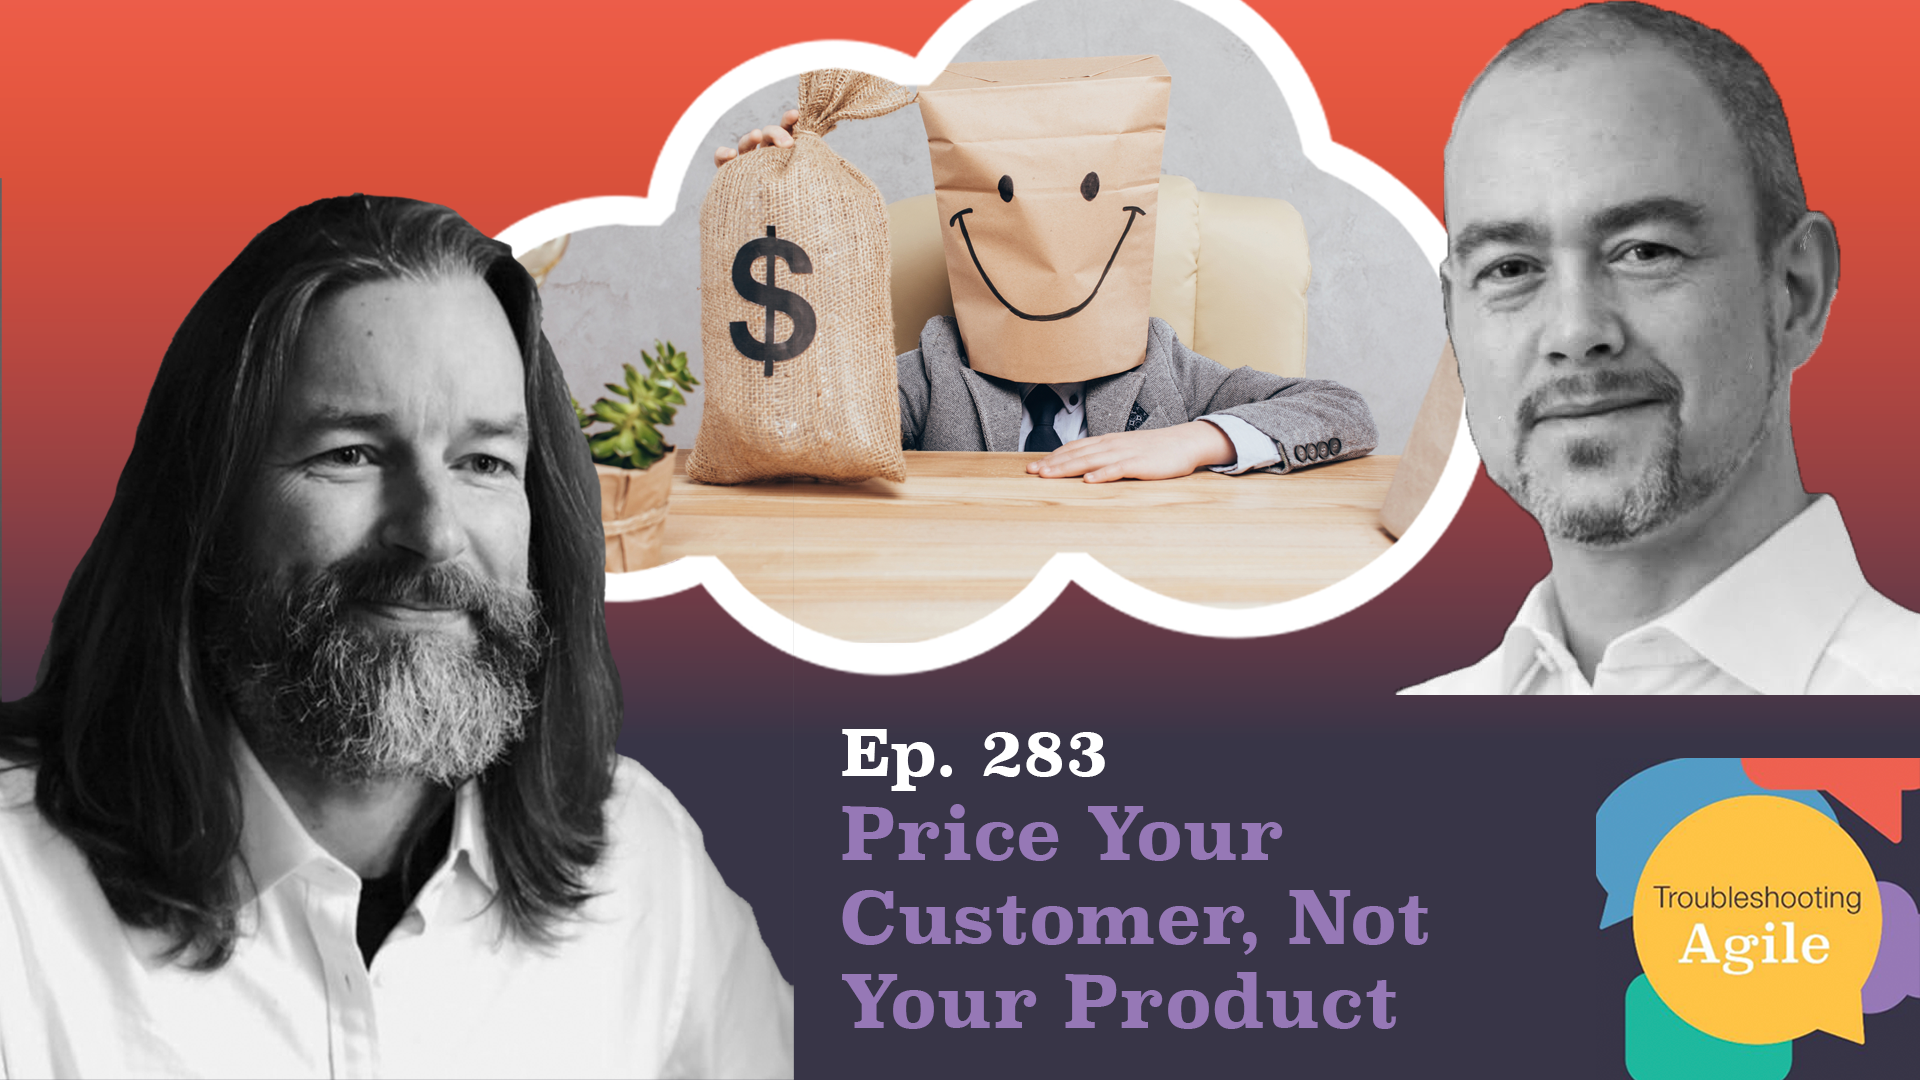 Price Your Customer, Not Your Product